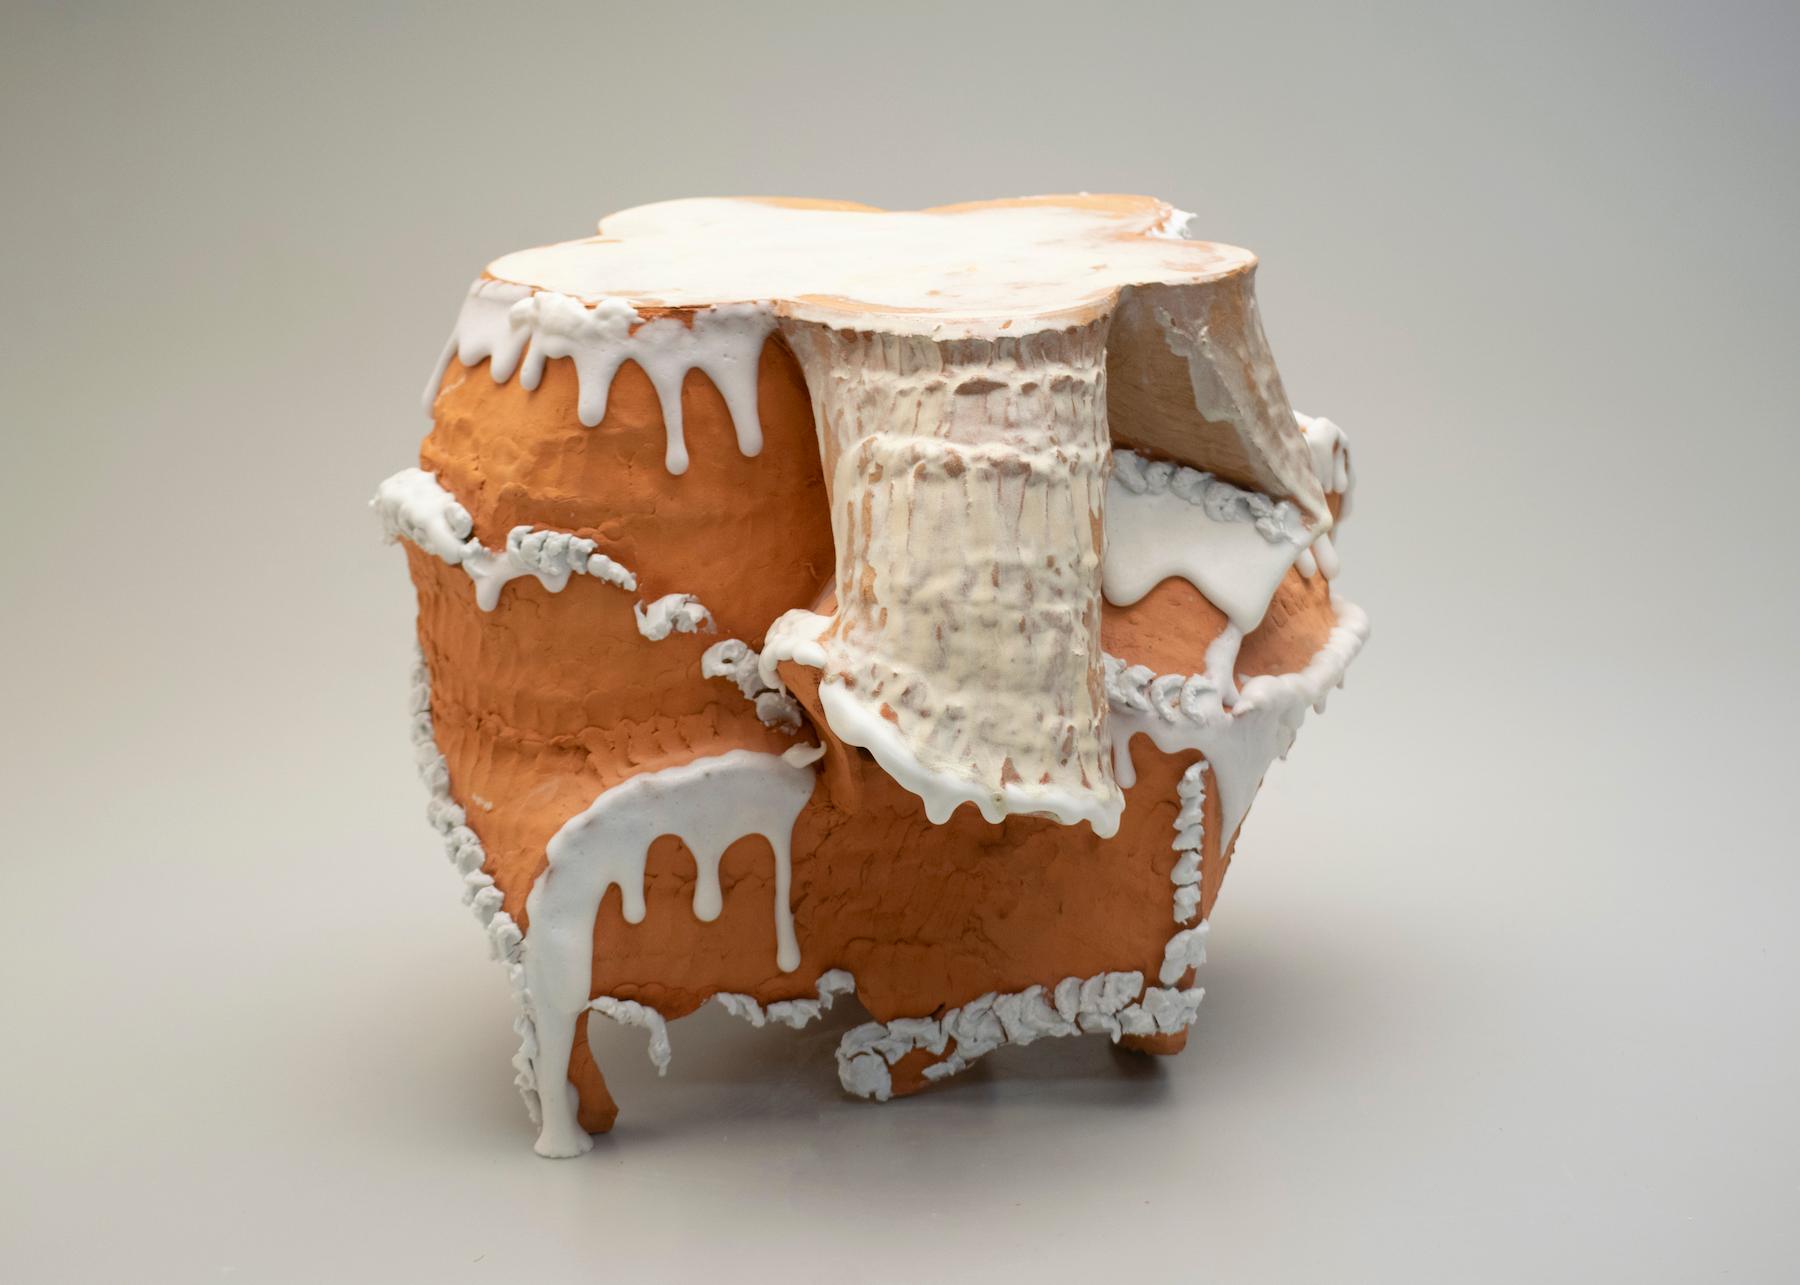 Side table/sculpture. Unique piece 

YehRim Lee was born in Seoul, Korea. The way she interacts with her work is directly connected to her background in ceramics. She earned her B.F.A in ceramics from Korea National University of Cultural Heritage